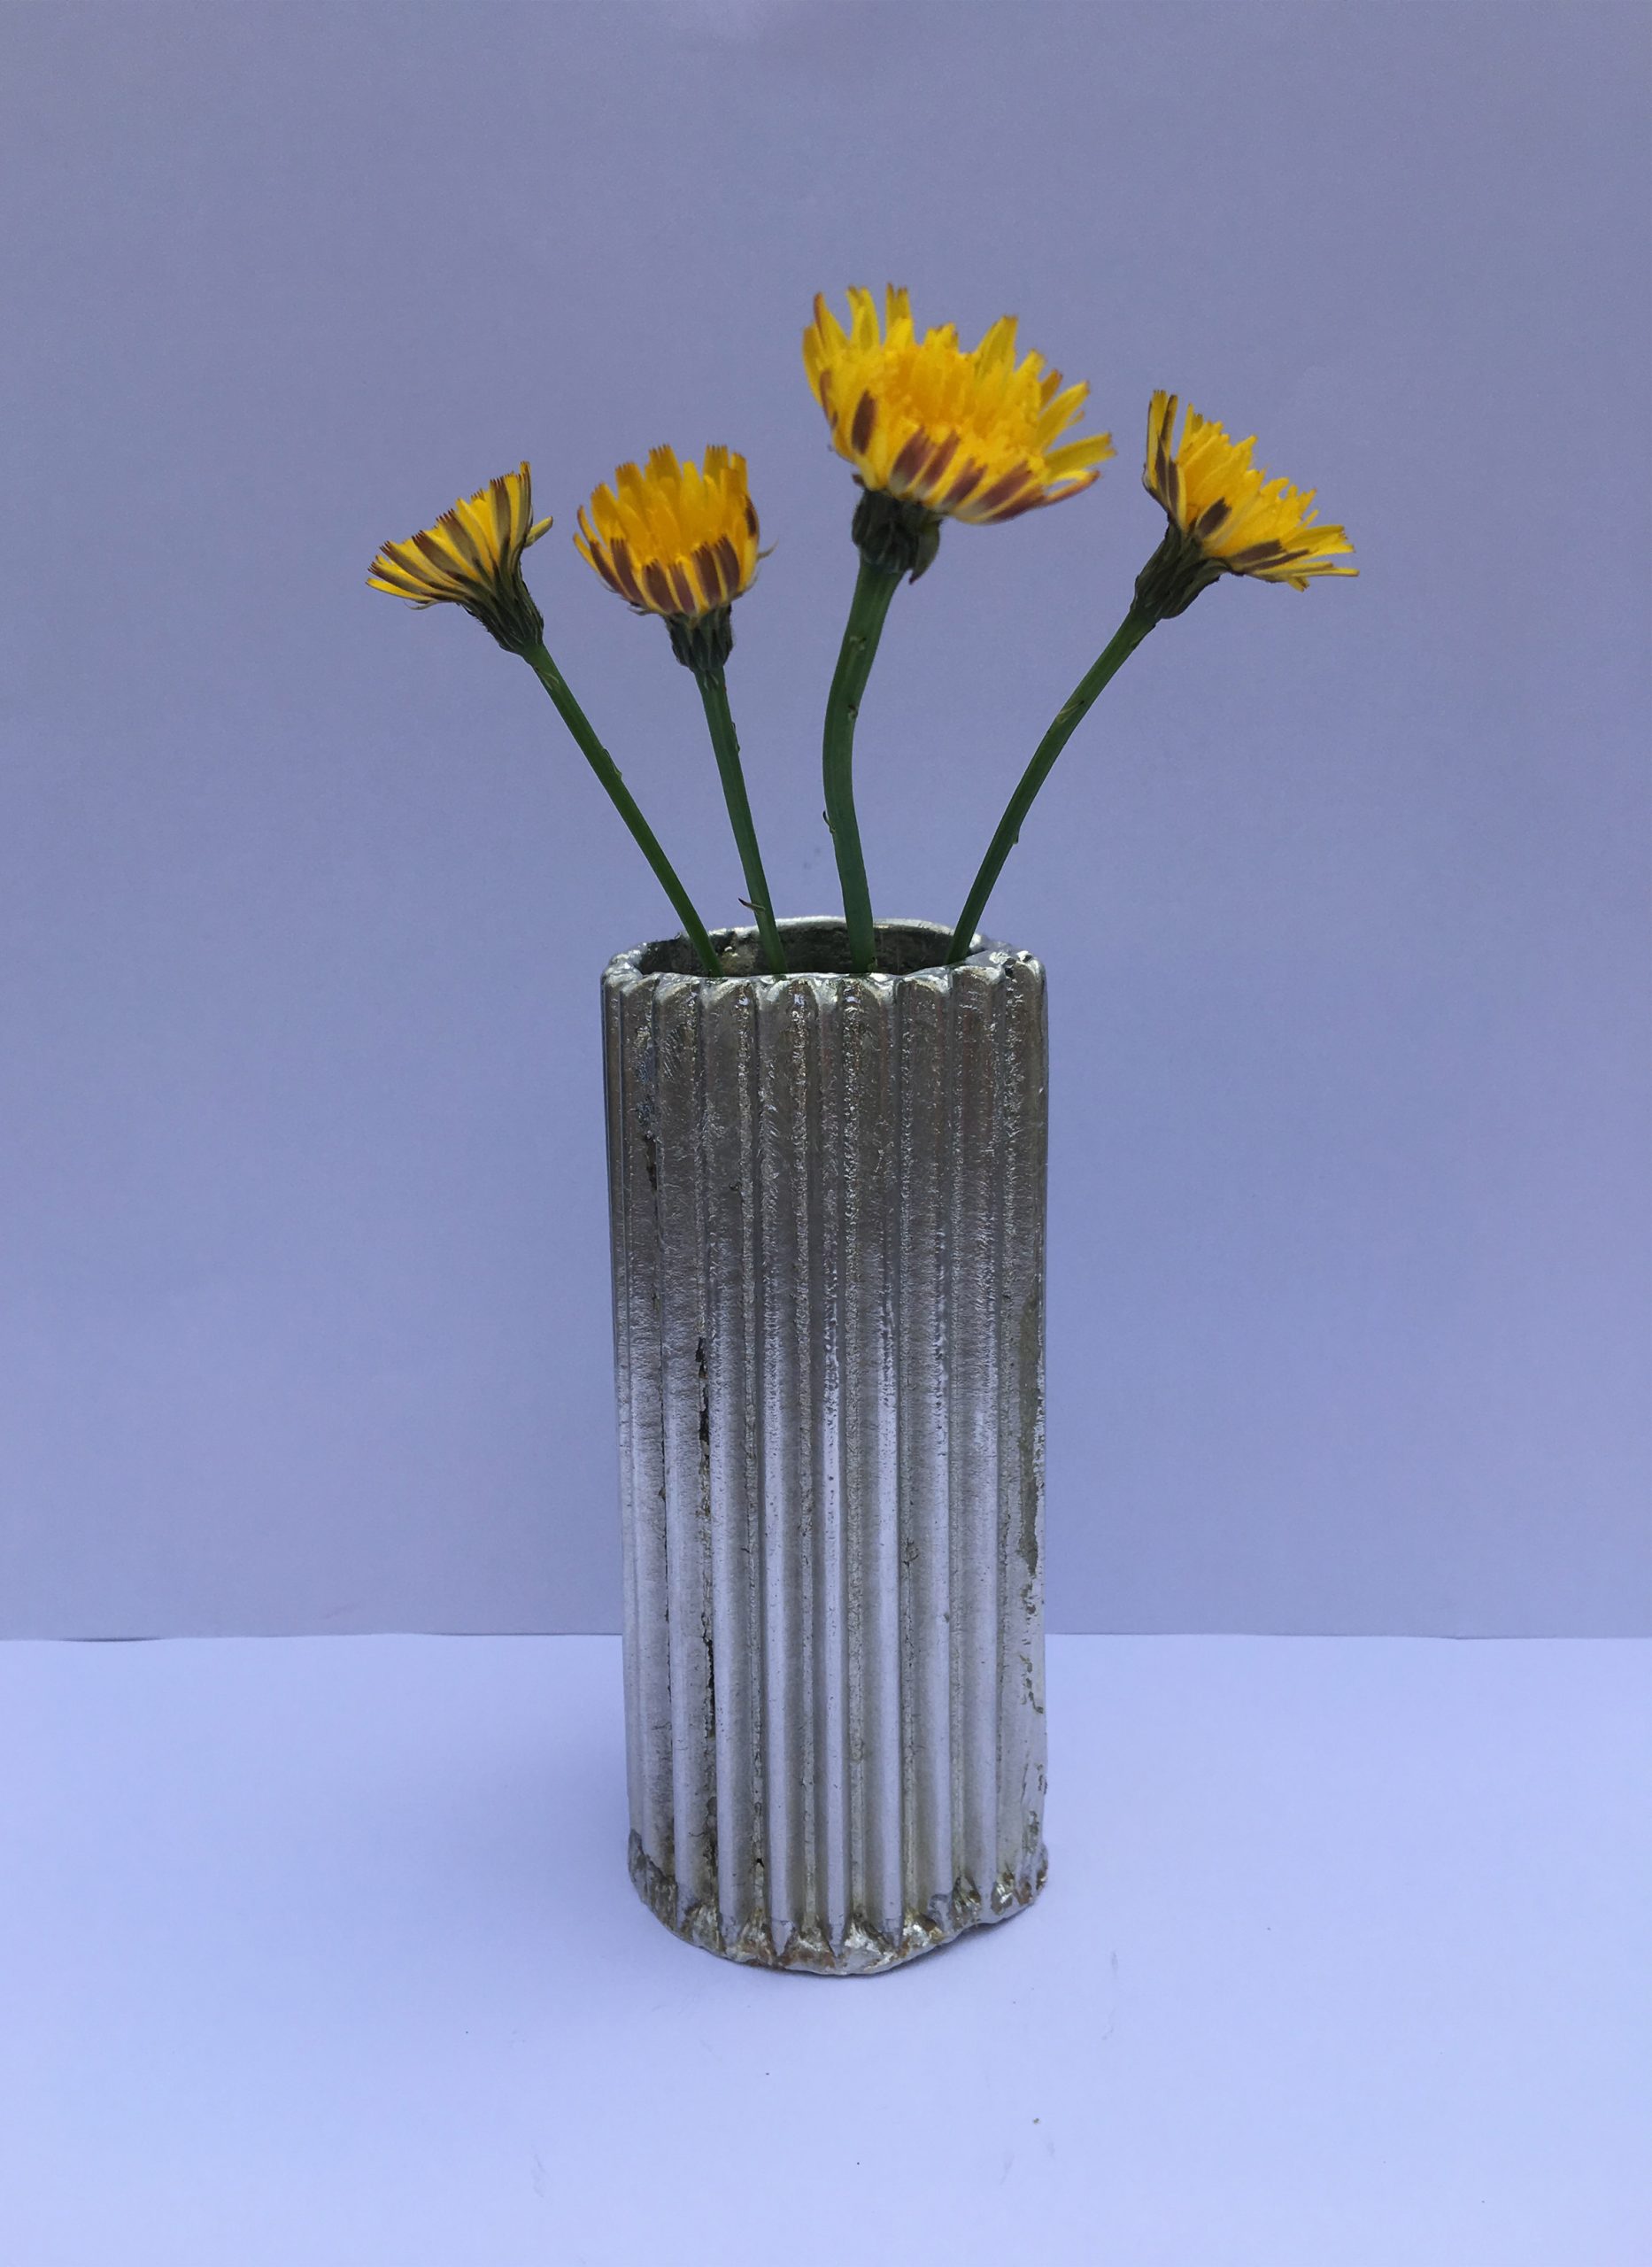 Cardboard Vase by Cathy Wolter